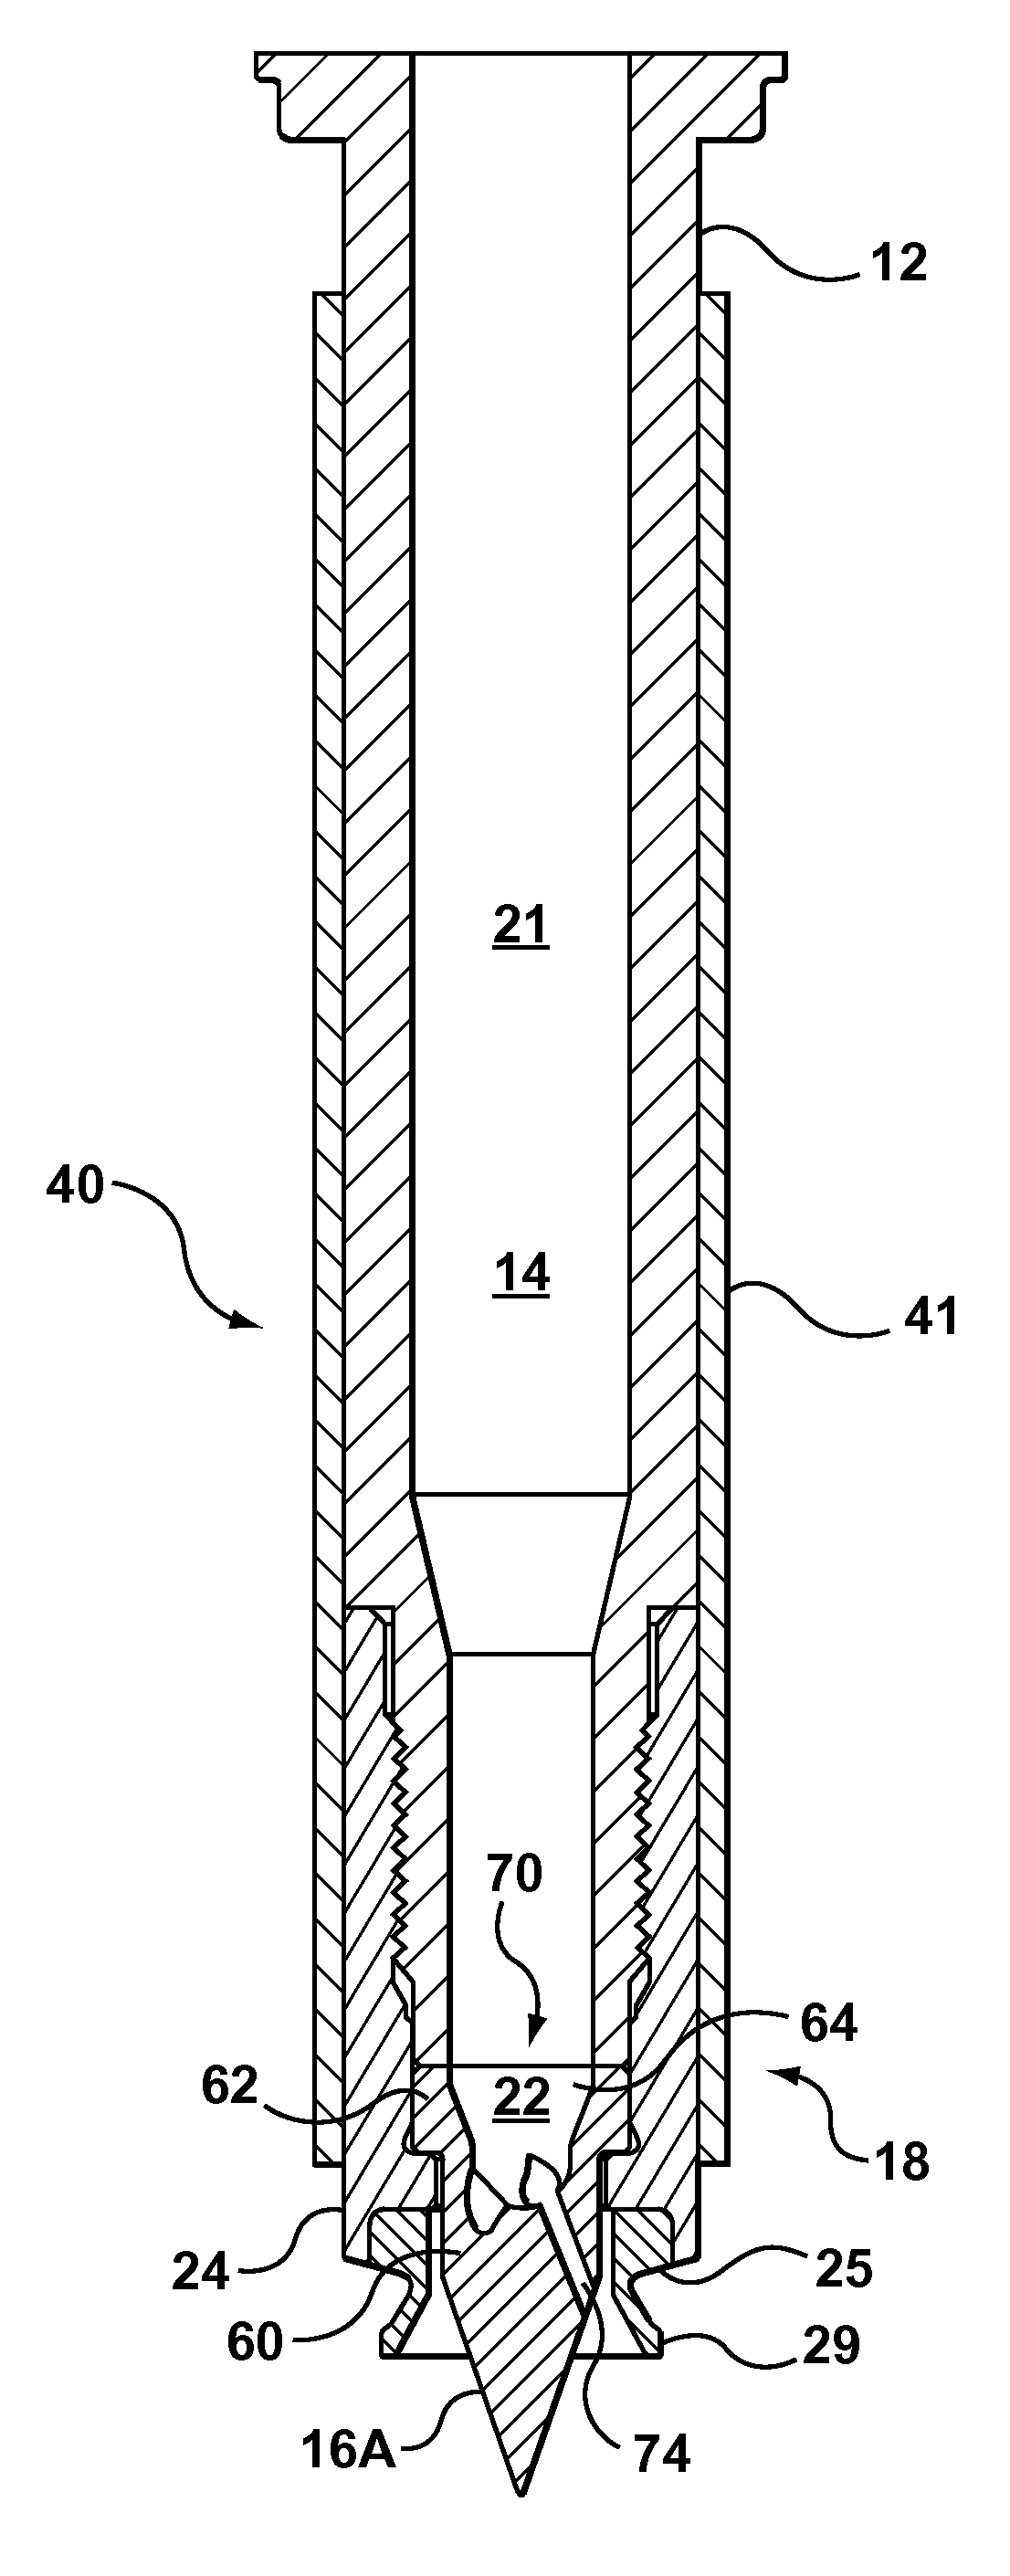 Injection Molding Nozzle Assembly with Composite Nozzle Tip